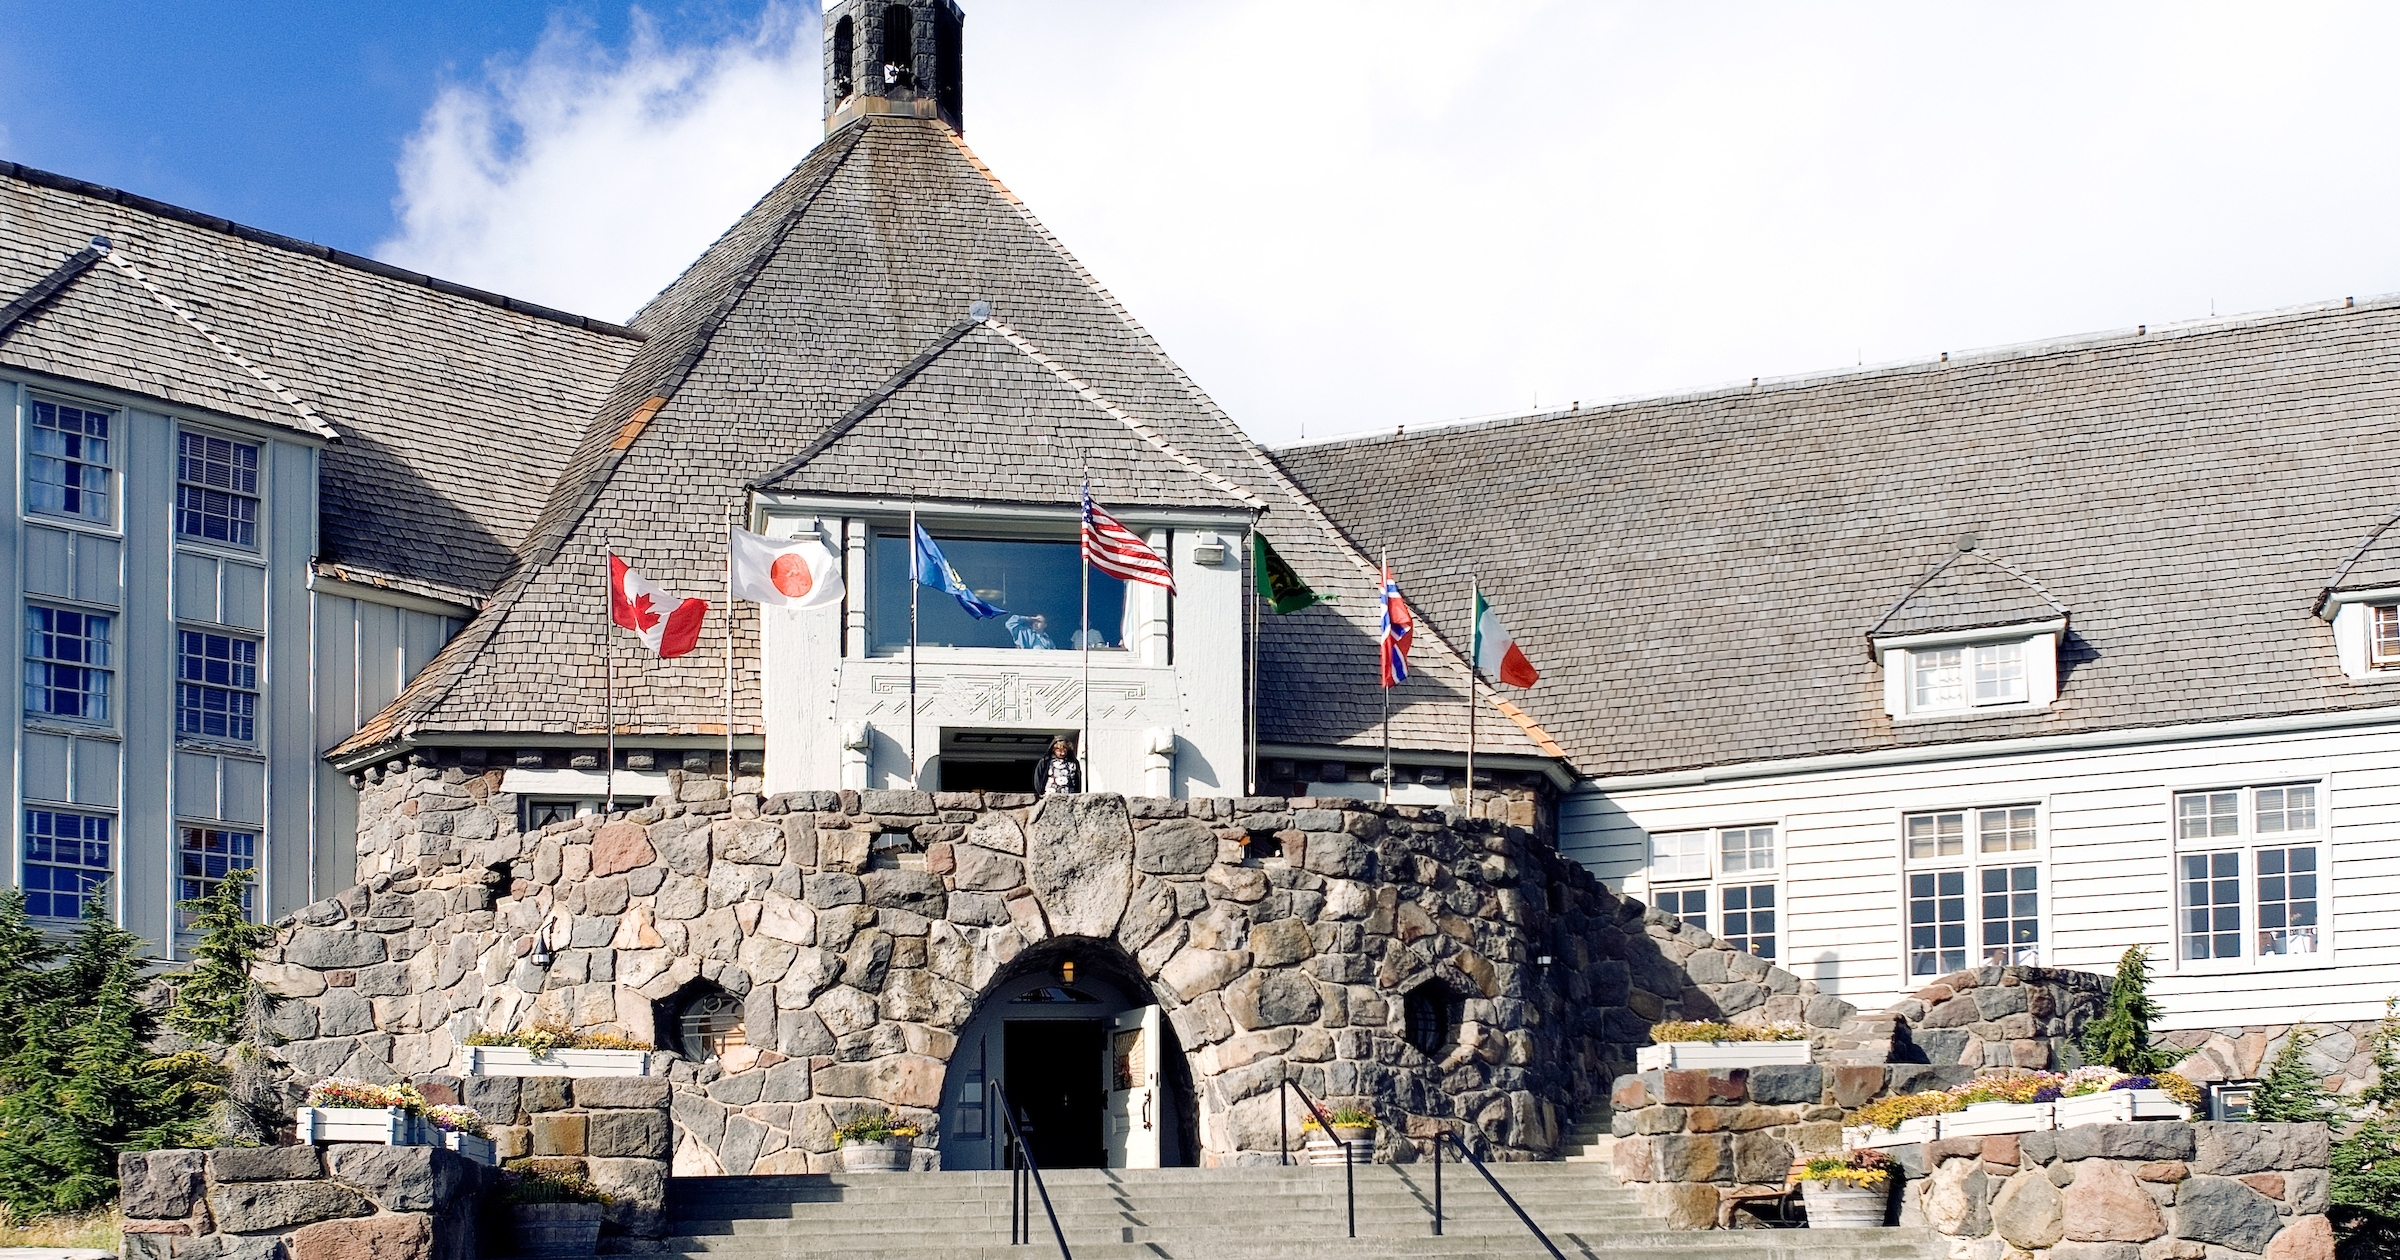 Contact Us at Timberline Lodge